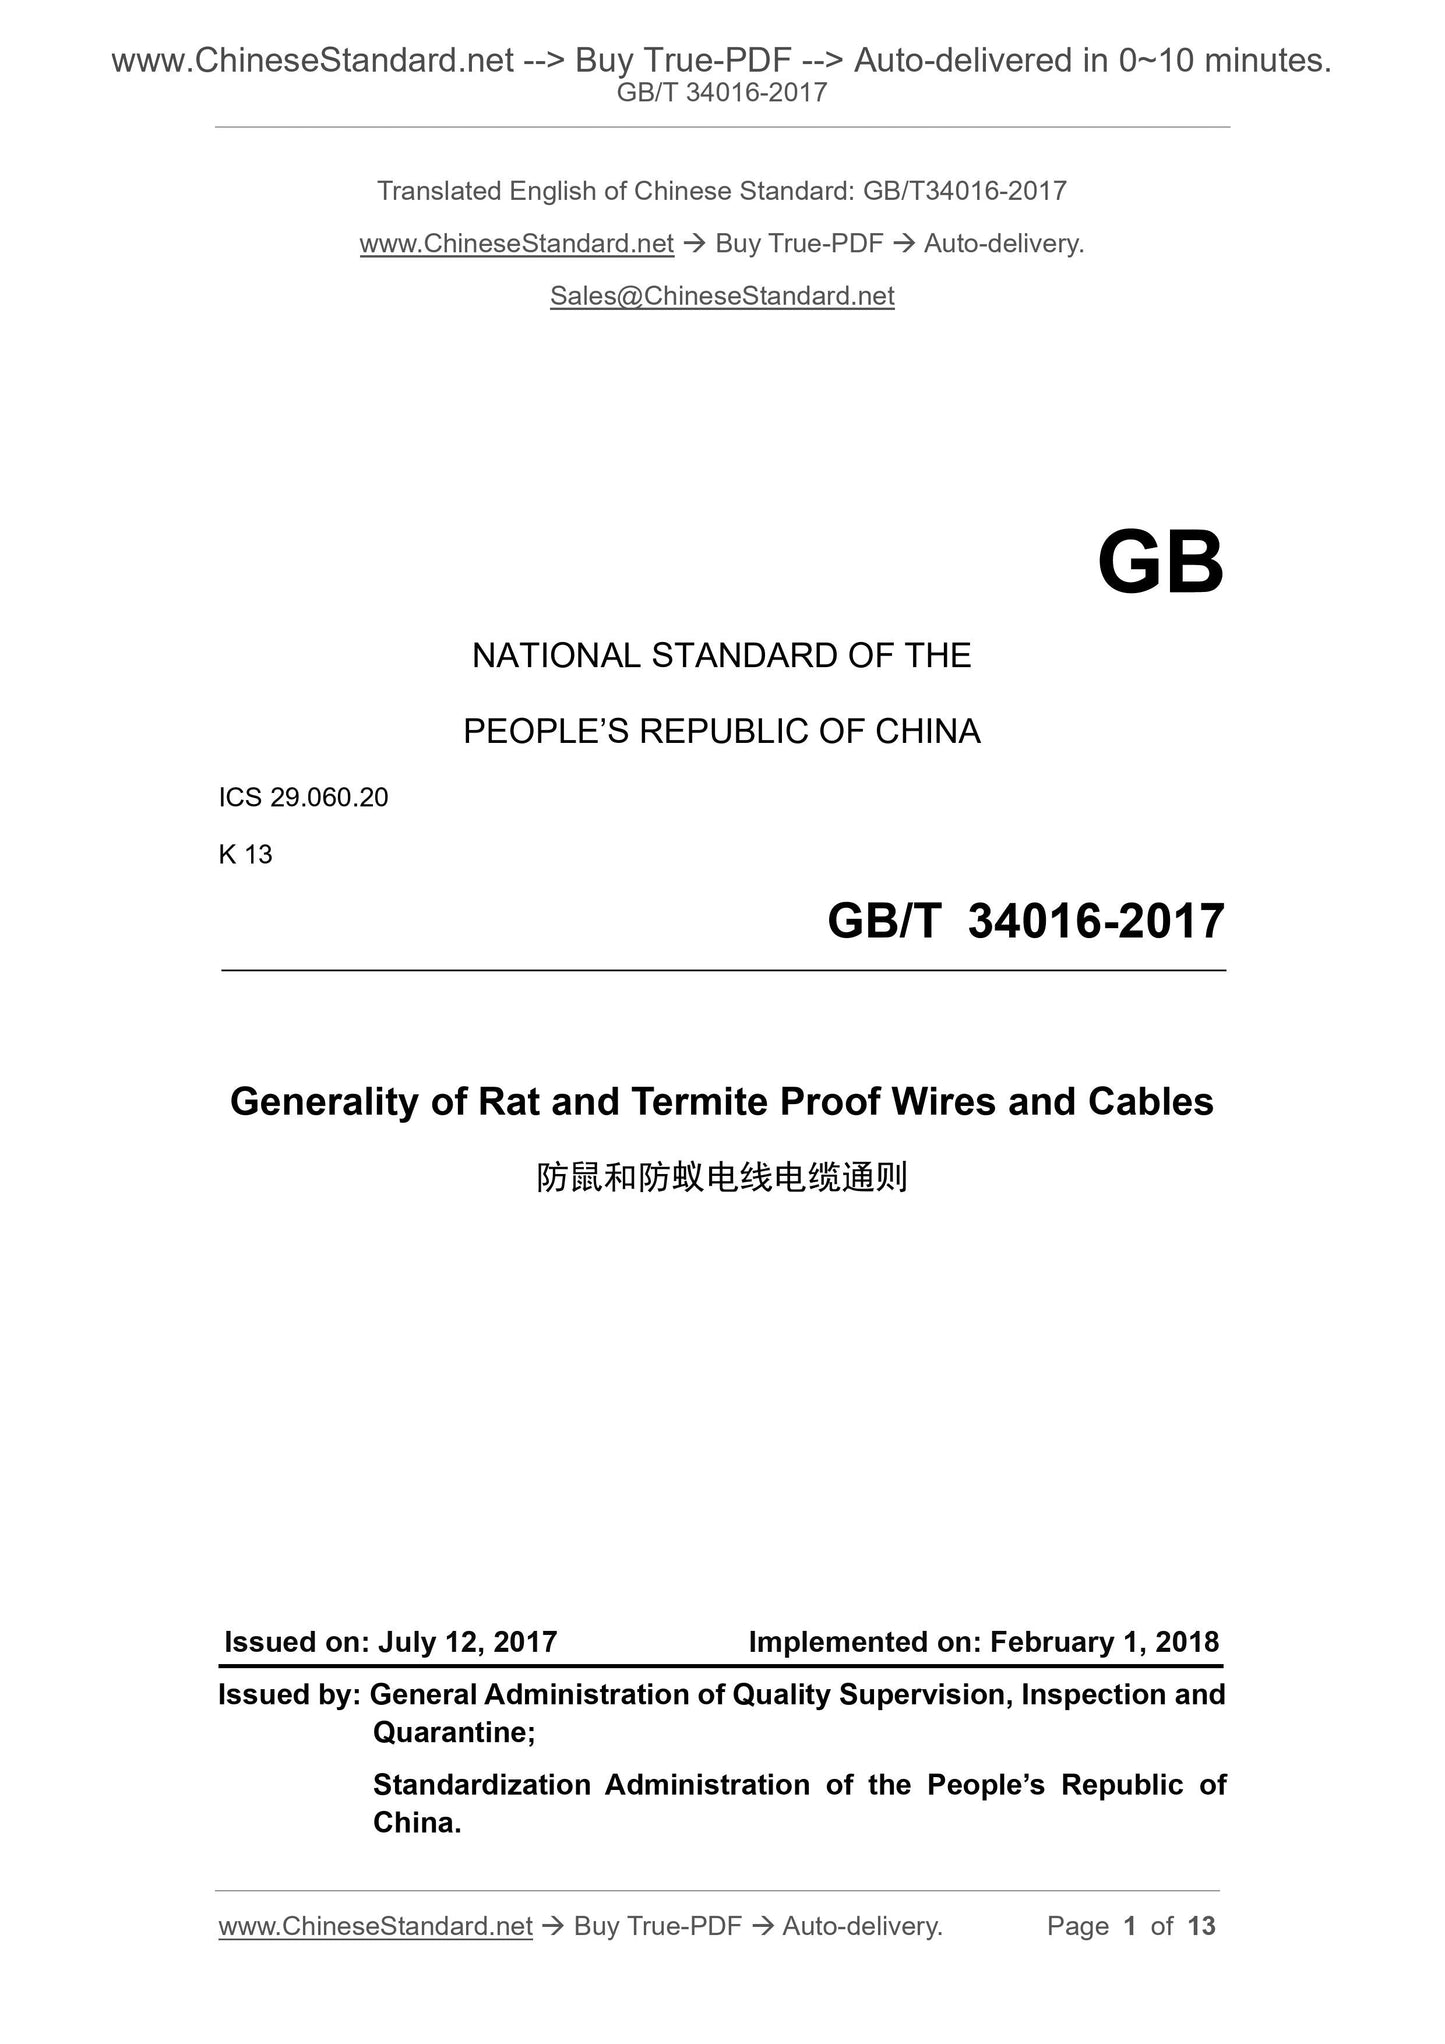 GB/T 34016-2017 Page 1